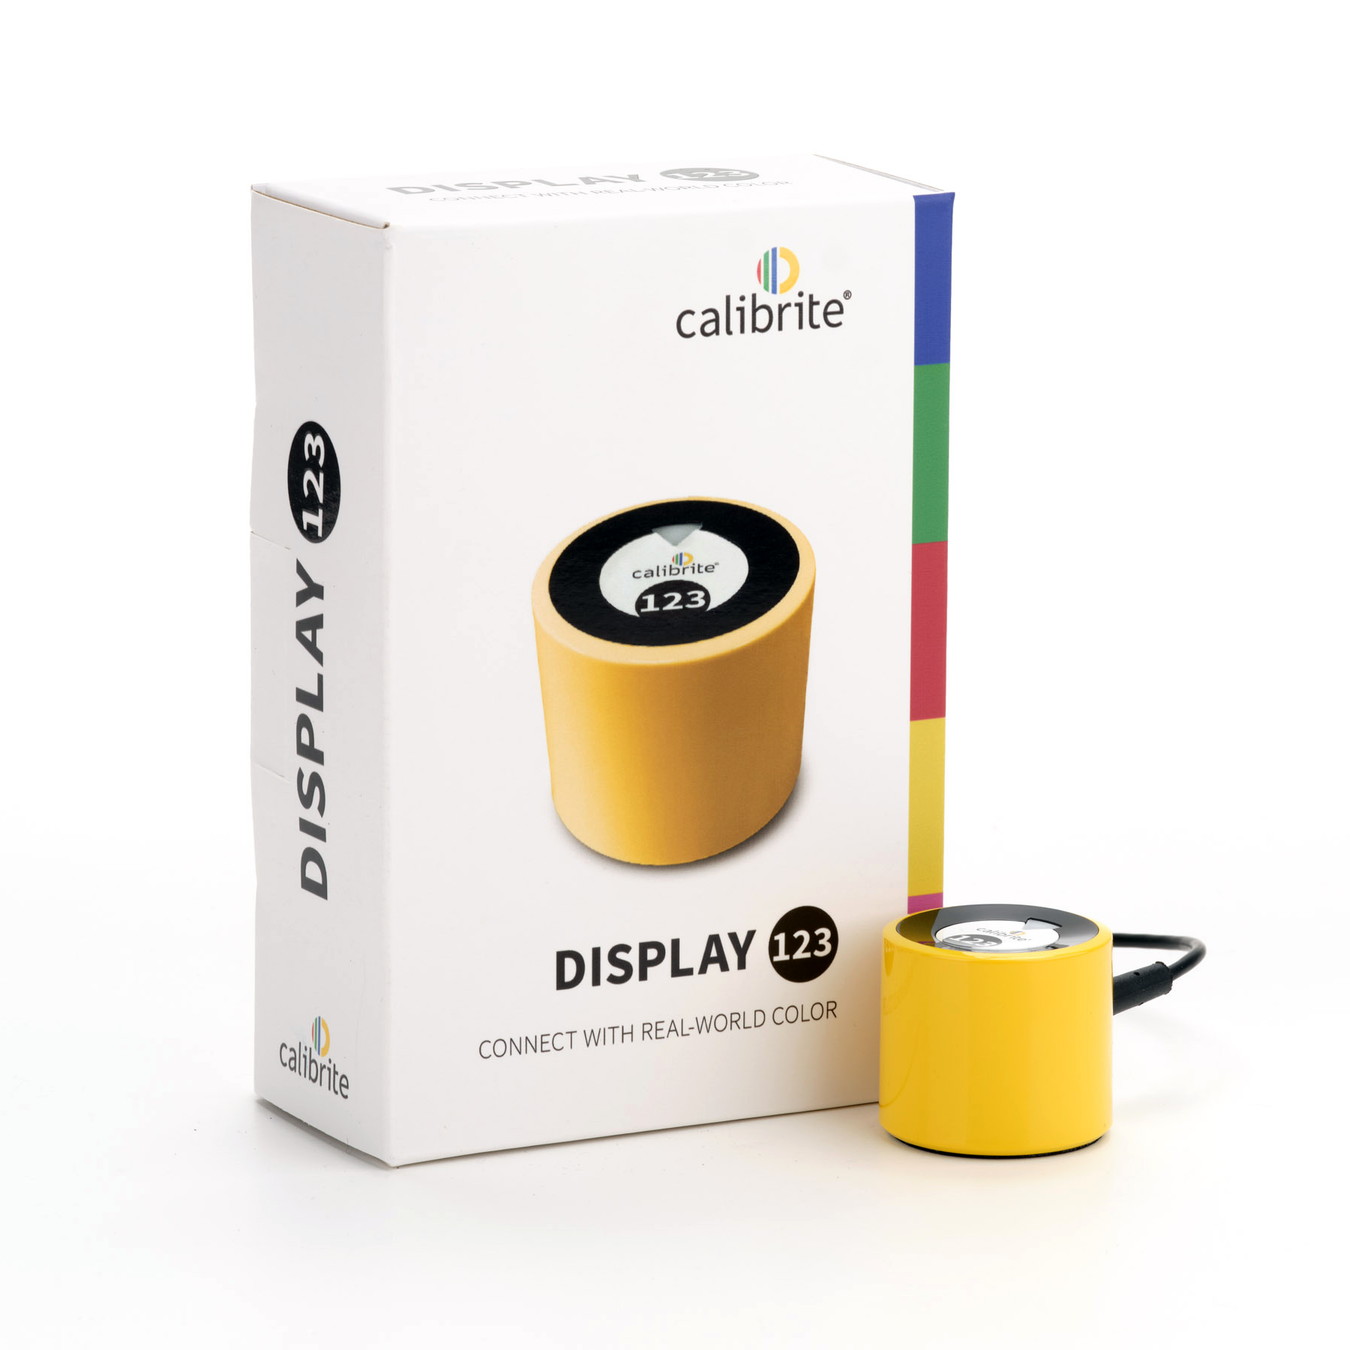 An image showing the Calibrite Display 123, a yellow, cylindrical device for calibrating the colour on your monitor, next to its cardboard packaging which shows the slogan "Connect with real-world color".